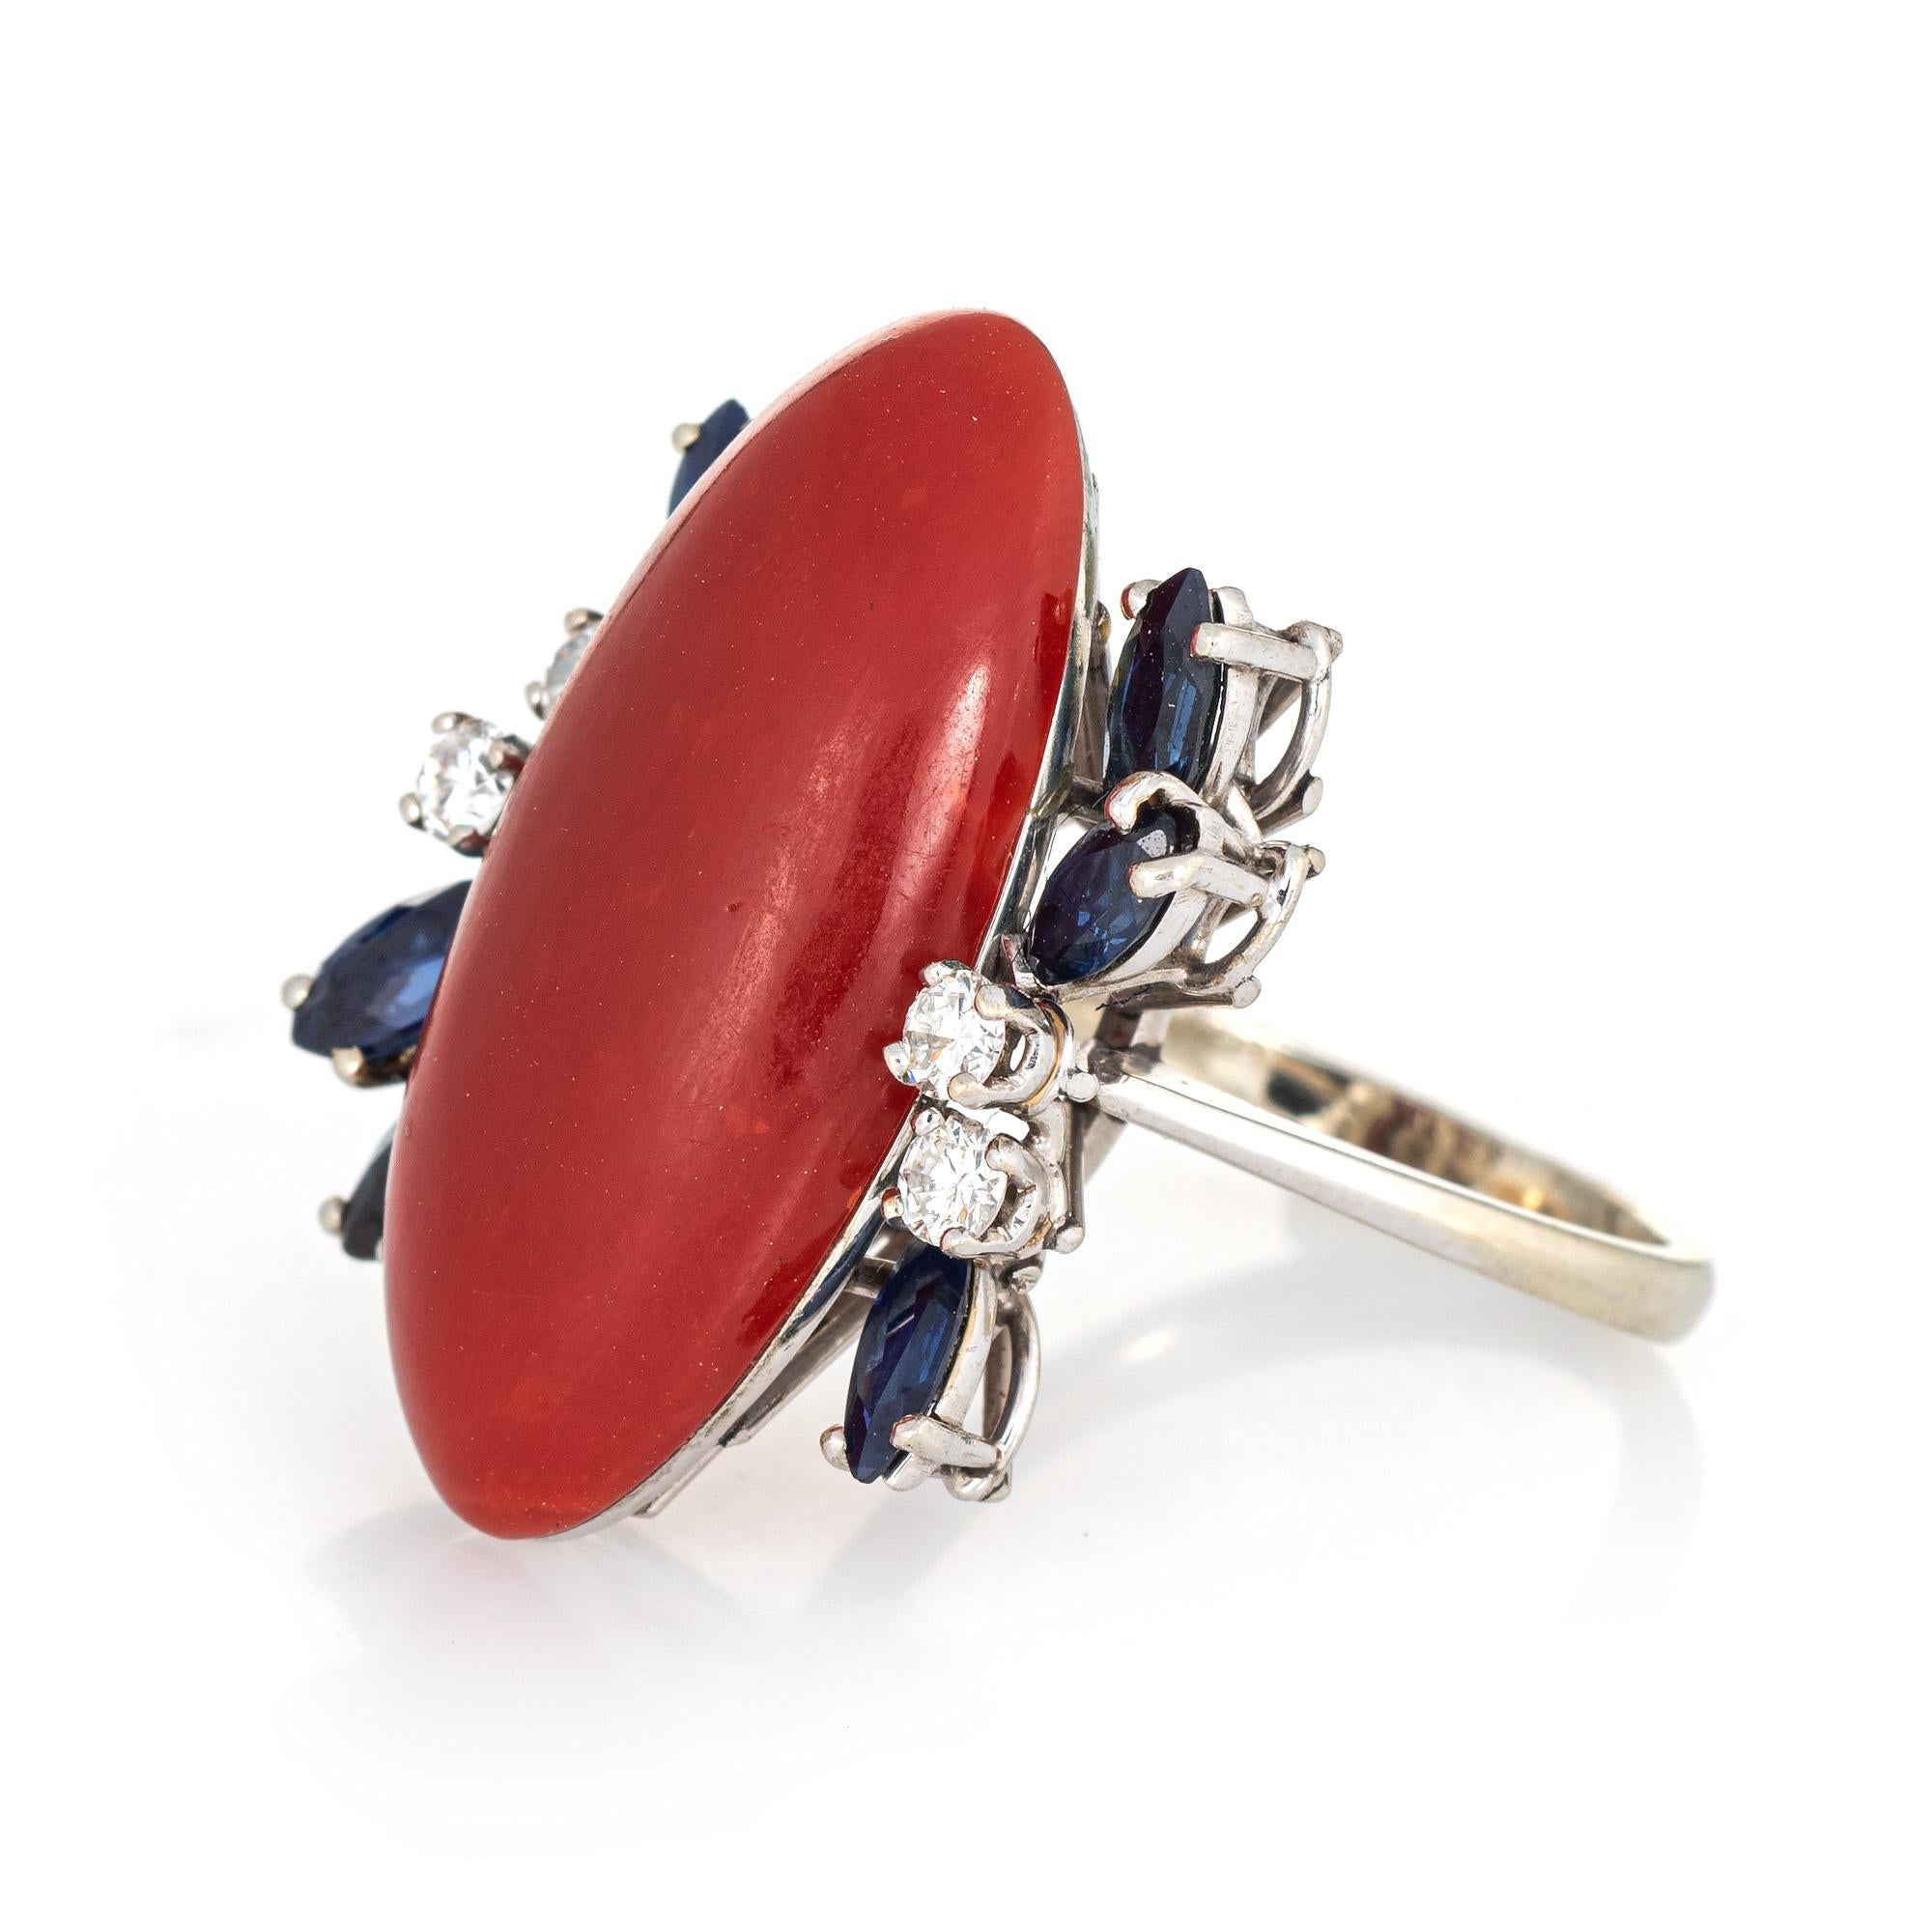 Cabochon Sardinian Red Coral Sapphire Diamond Ring Vintage 18 Karat Gold Fine Cocktail For Sale